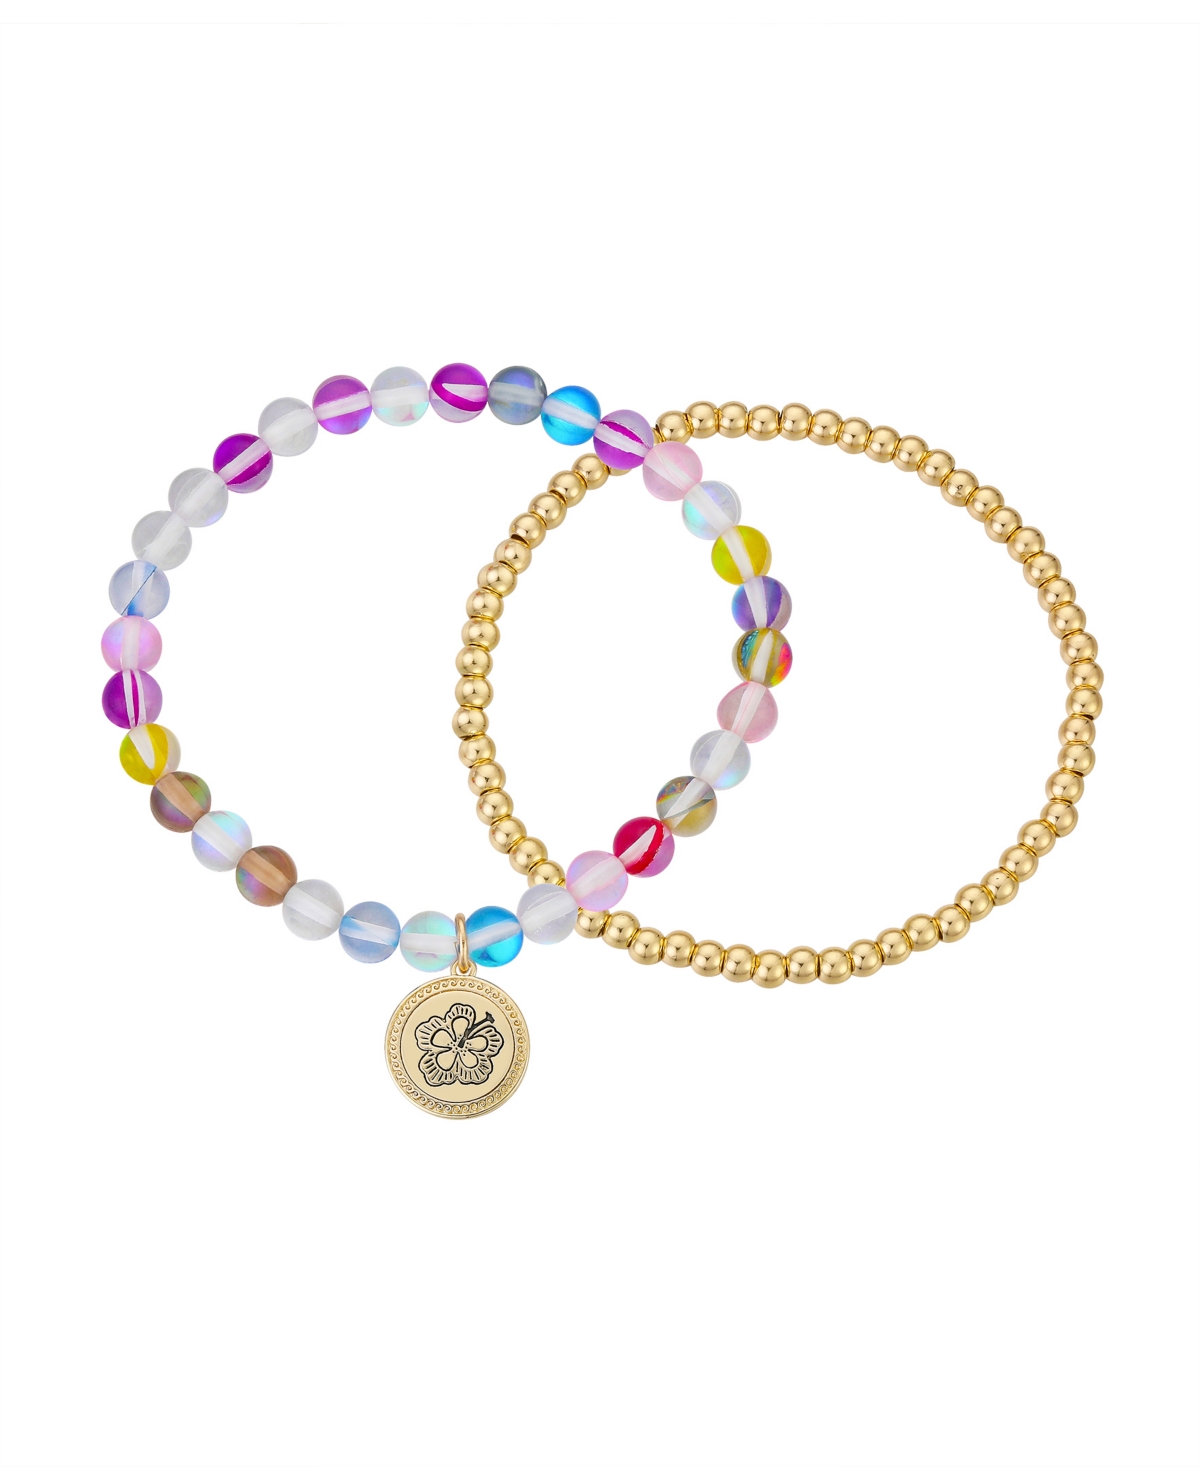 Unwritten Multi Color Glass Beads Little Mermaid "Family is a Treasure" Beaded Stretch 2-Piece Set Bracelet - Gold